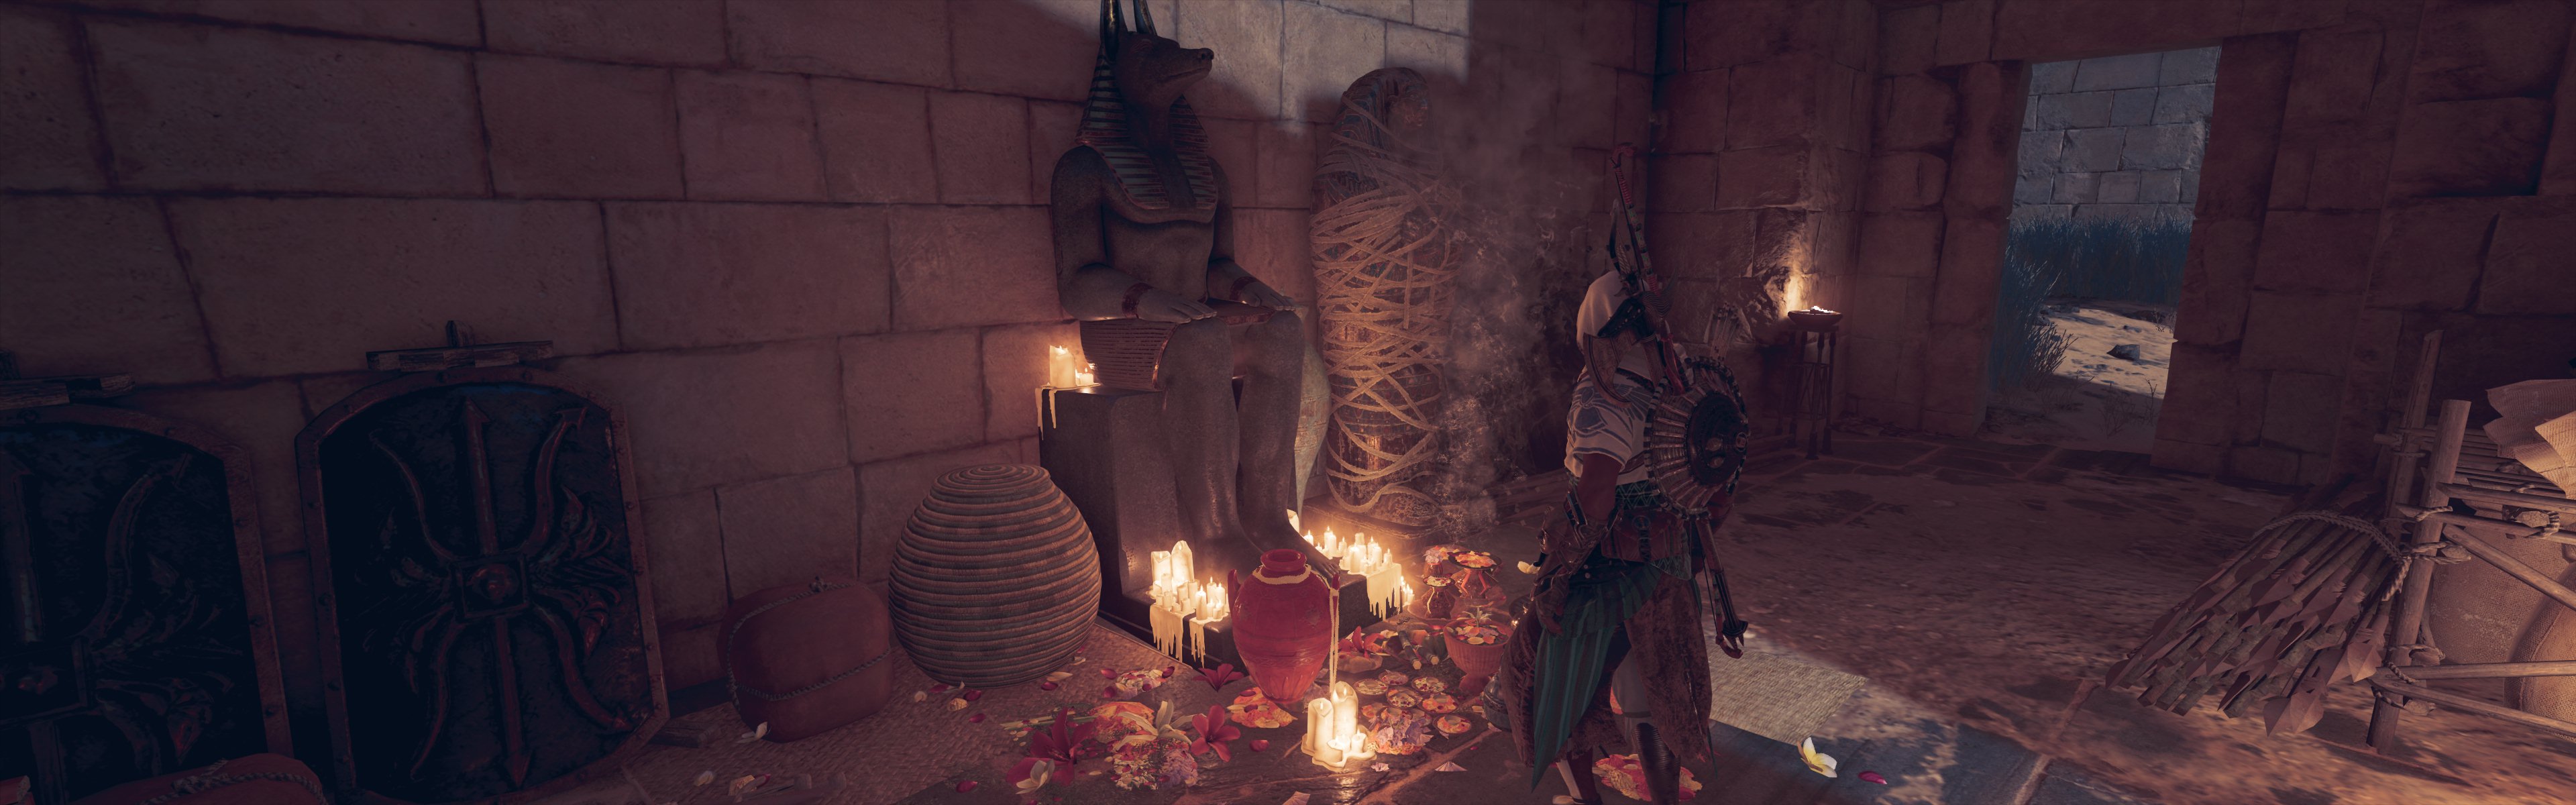 Egypt Pyramid Wide Angle Assassins Creed Origins Video Games CGi Candles Statue Baskets 3840x1200